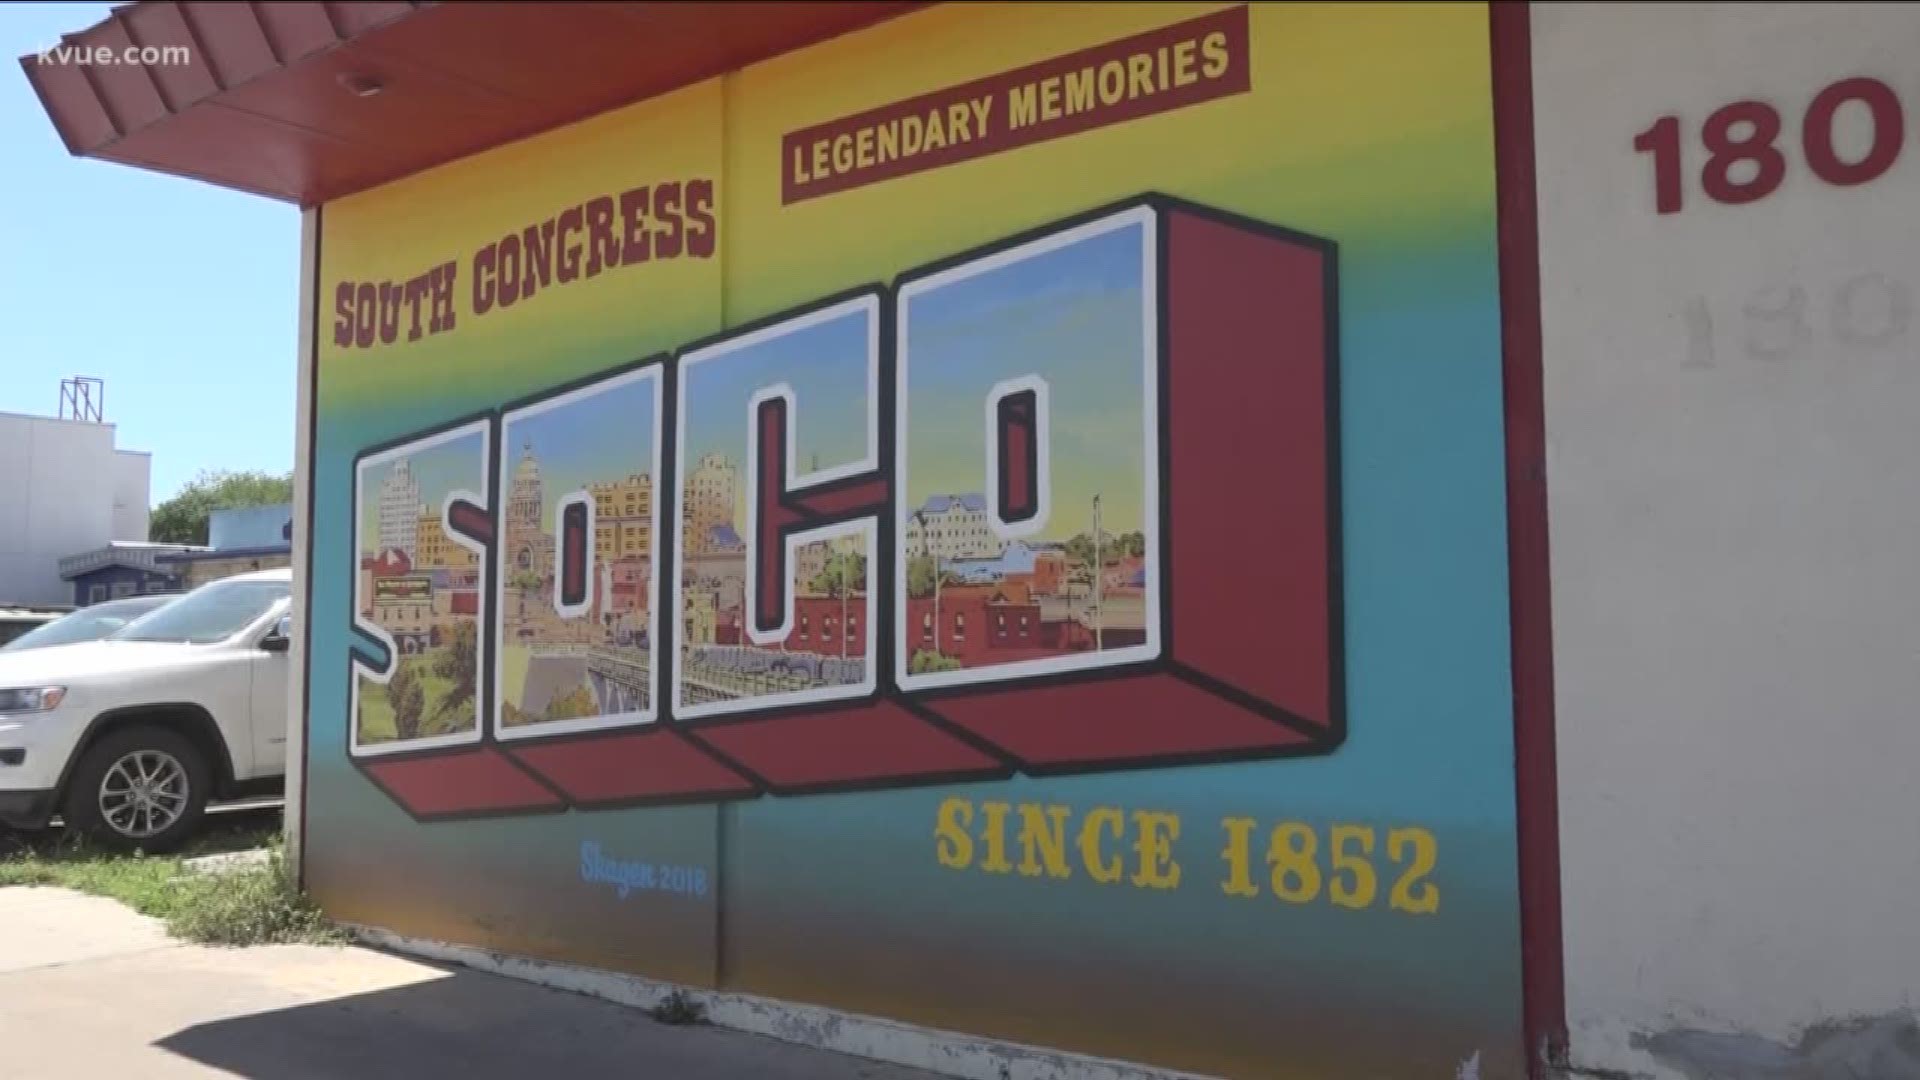 As part of our Boomtown 2040 series, Luis de Leon took a look at the history and future of Austin's iconic South Congress Avenue.